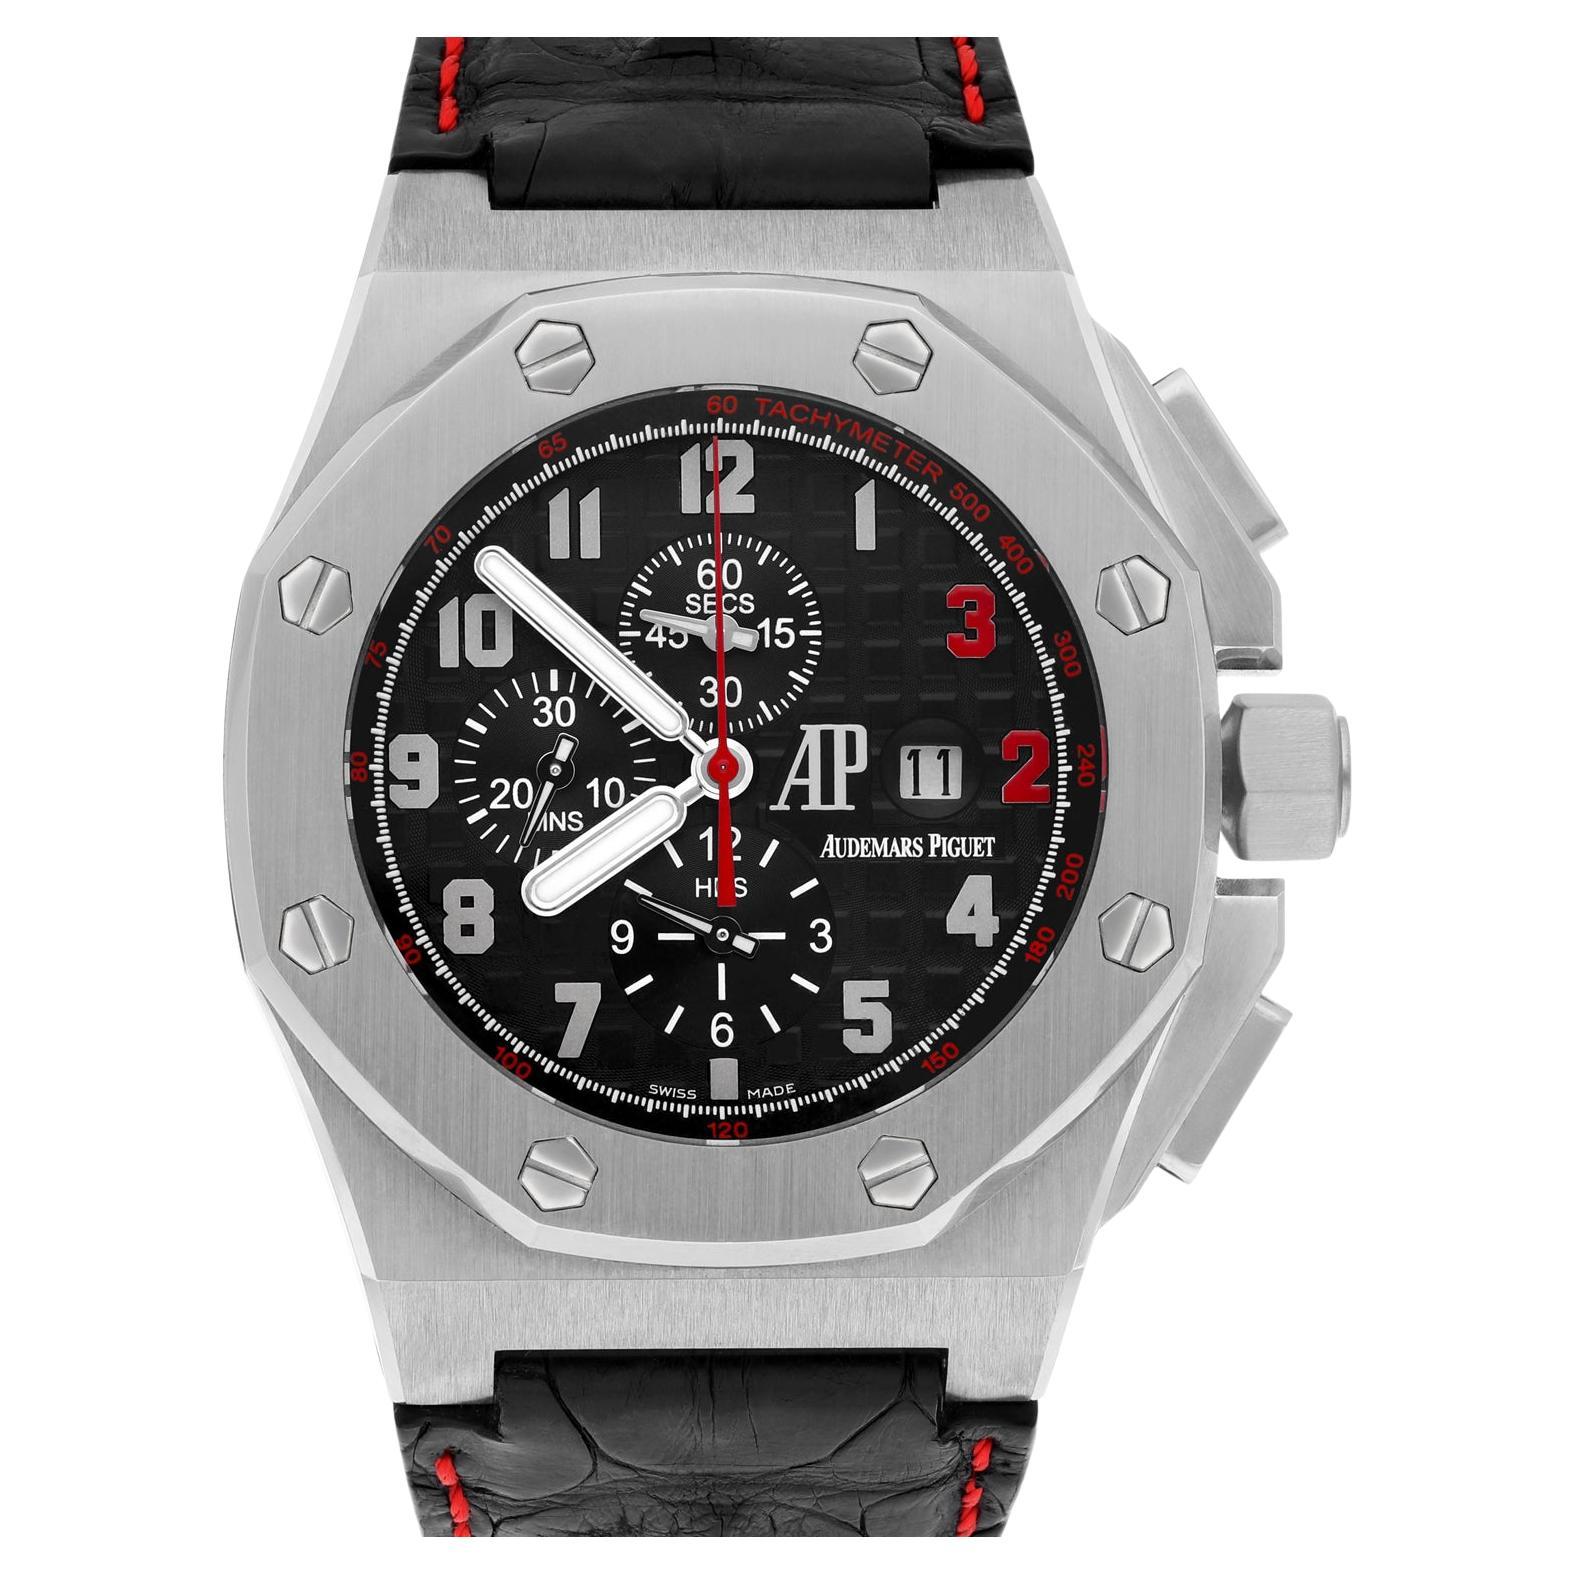 Audemars Piguet Royal Oak Offshore Shaquille O'Neal 26133ST.OO.A101CR.01 LIMITED For Sale